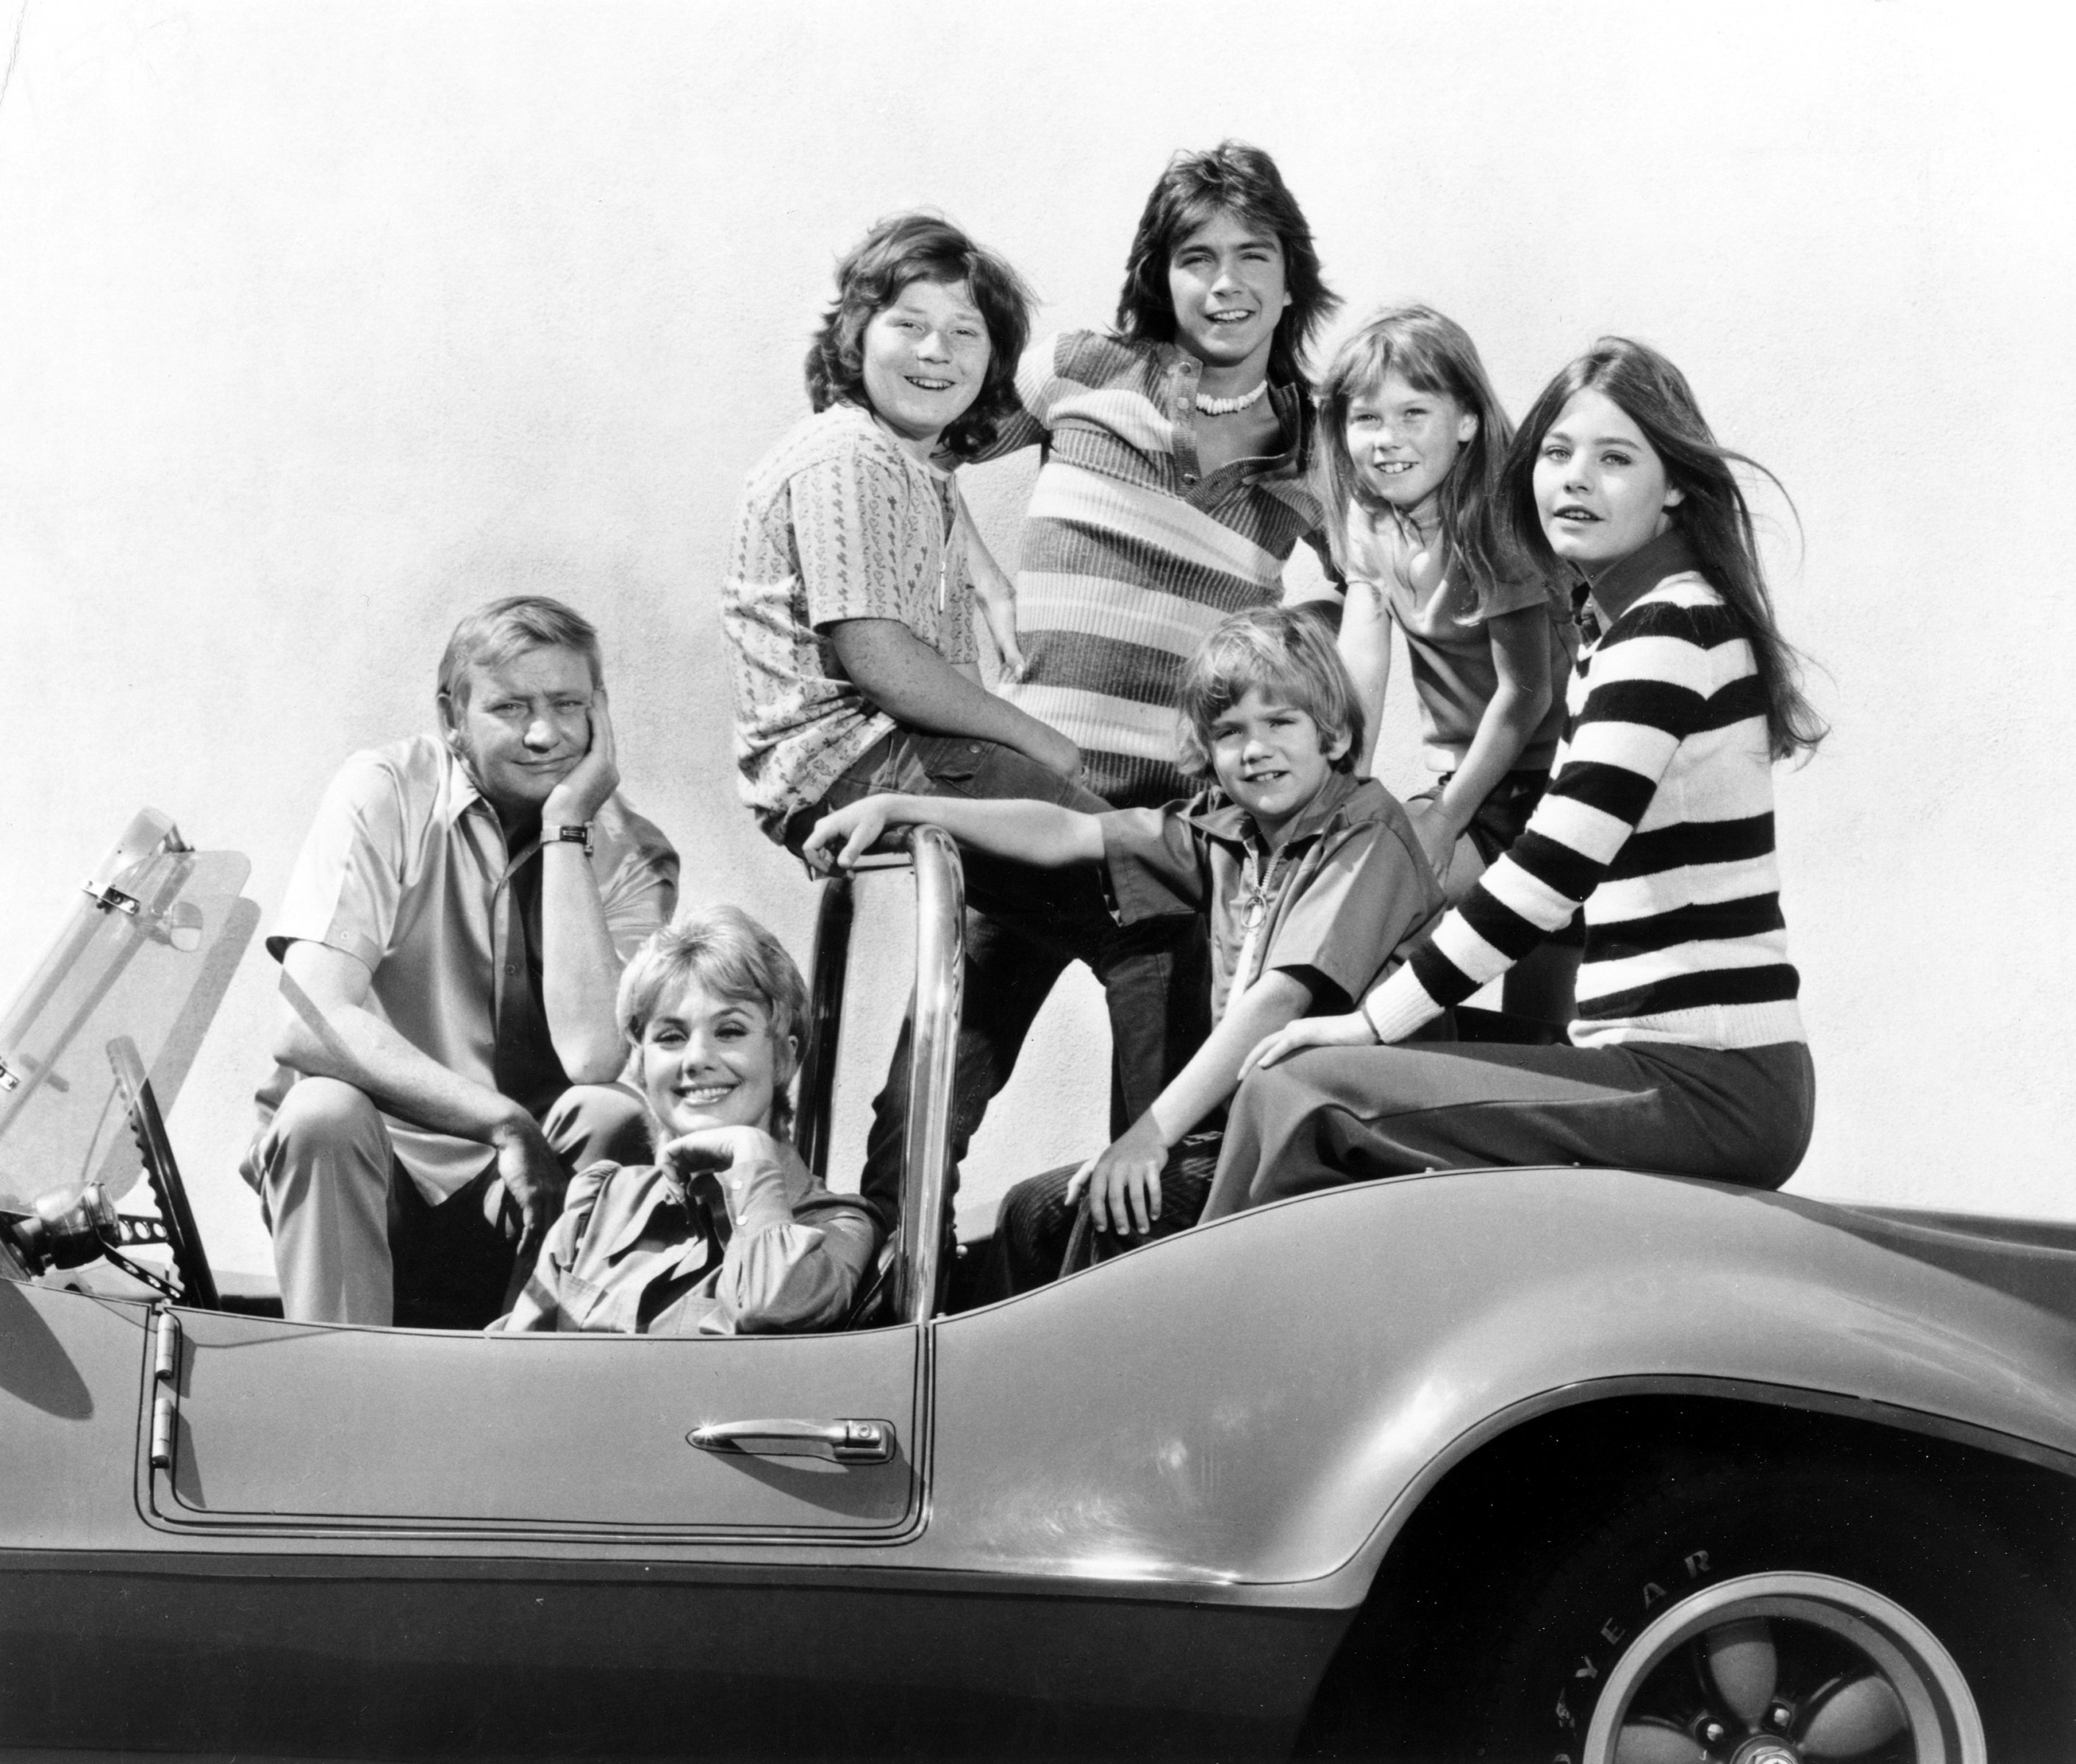 The Partridge Family with a car